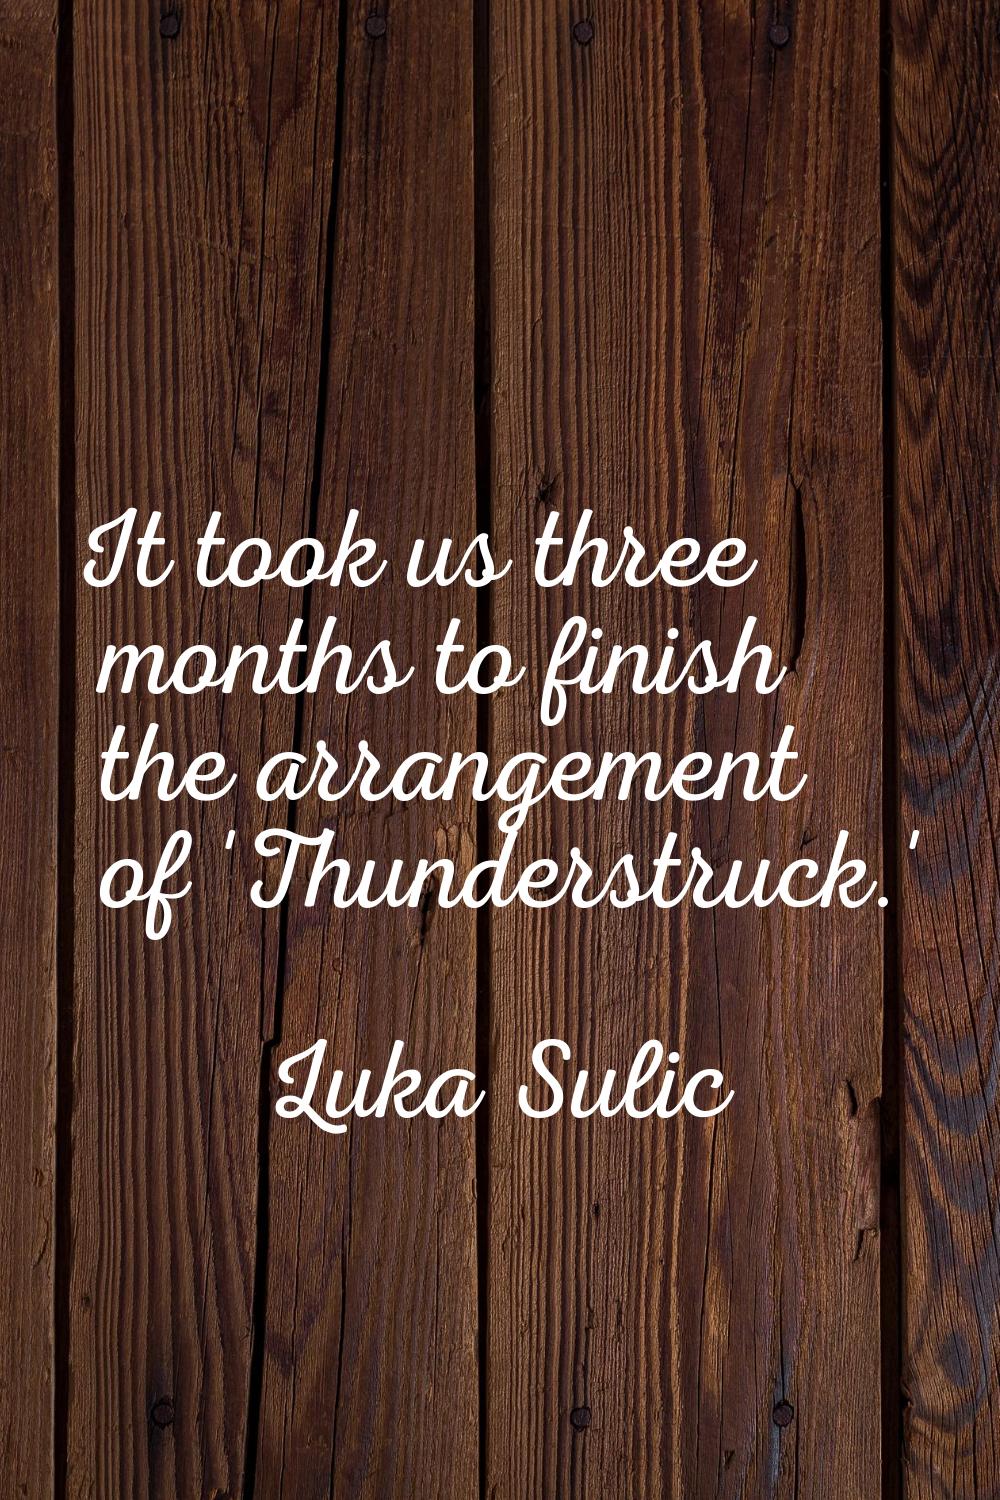 It took us three months to finish the arrangement of 'Thunderstruck.'